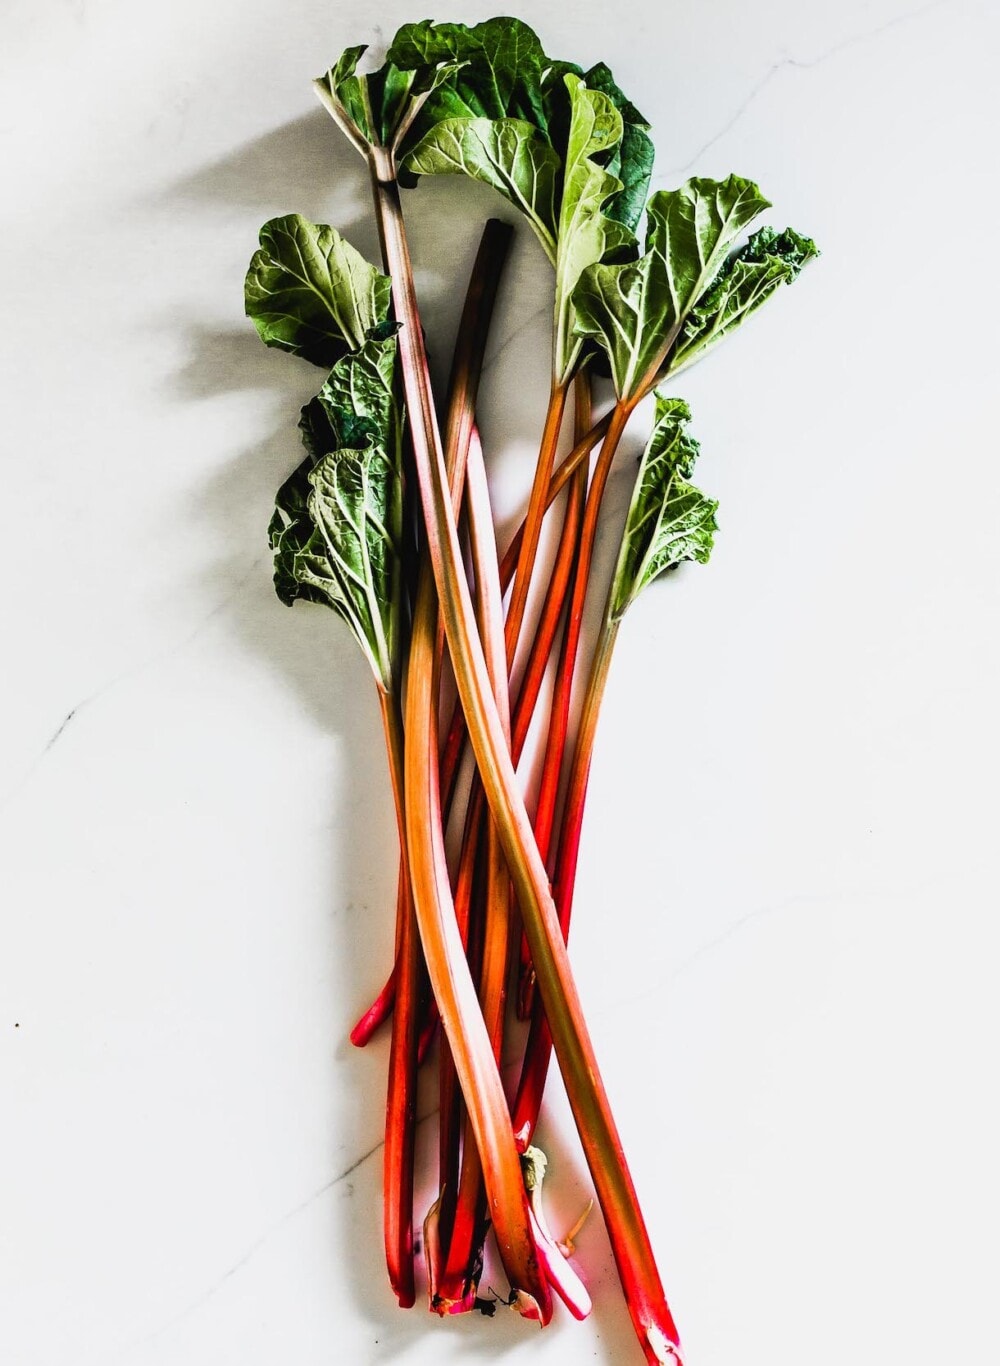 rhubarb stalks with green leaves attached